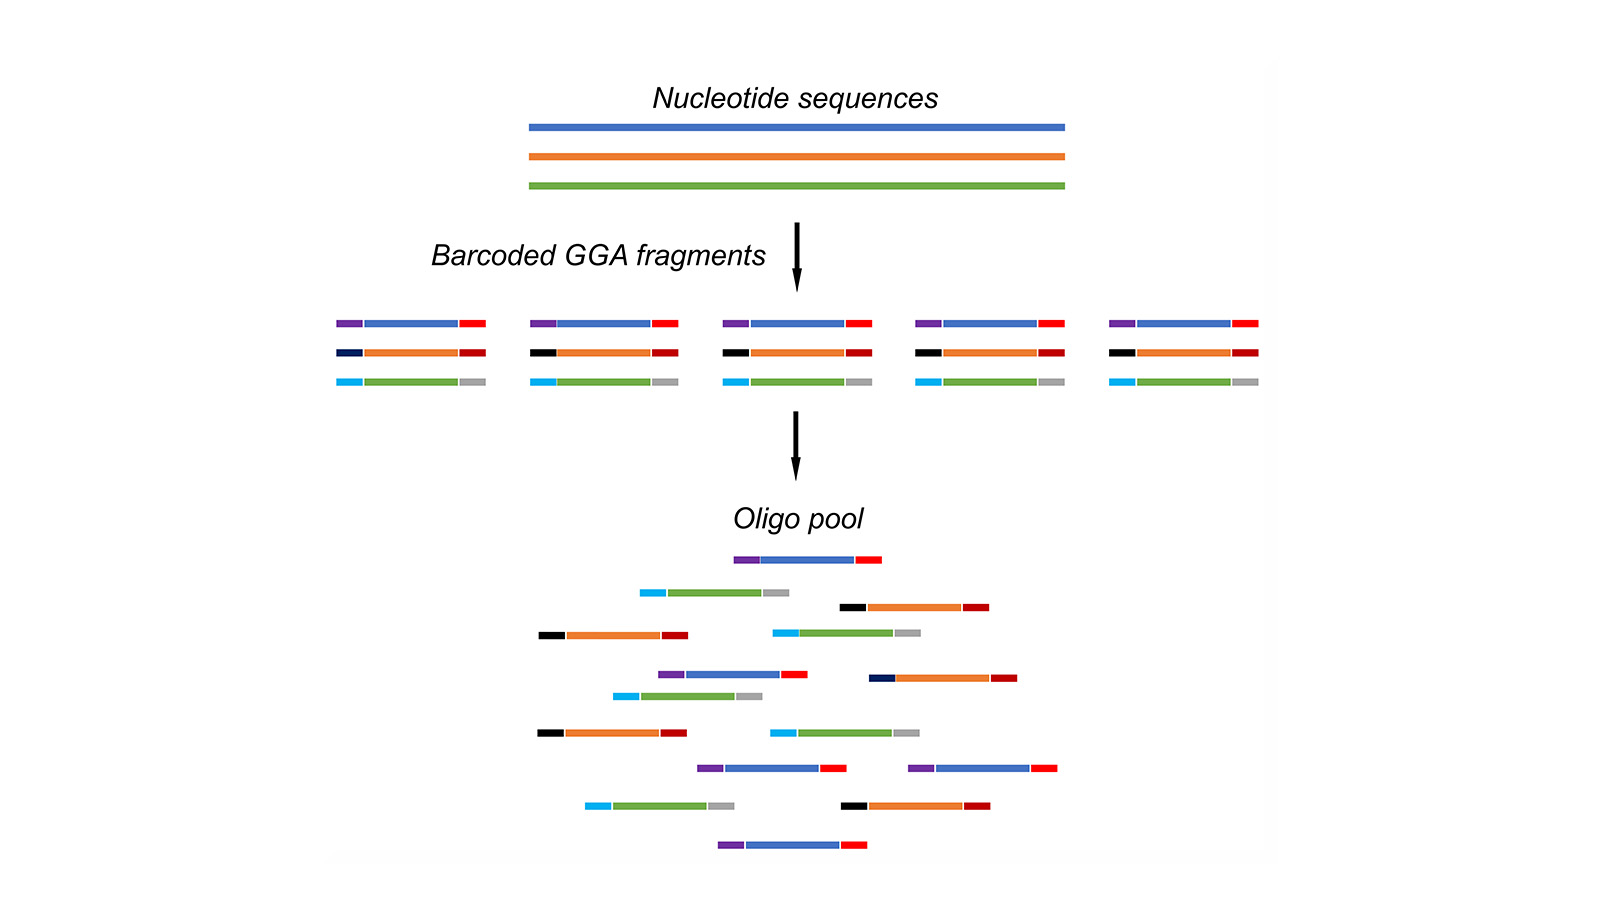 The image shows nucleotide sequences turned into barcoded fragments, which are then combined into an oligo pool.